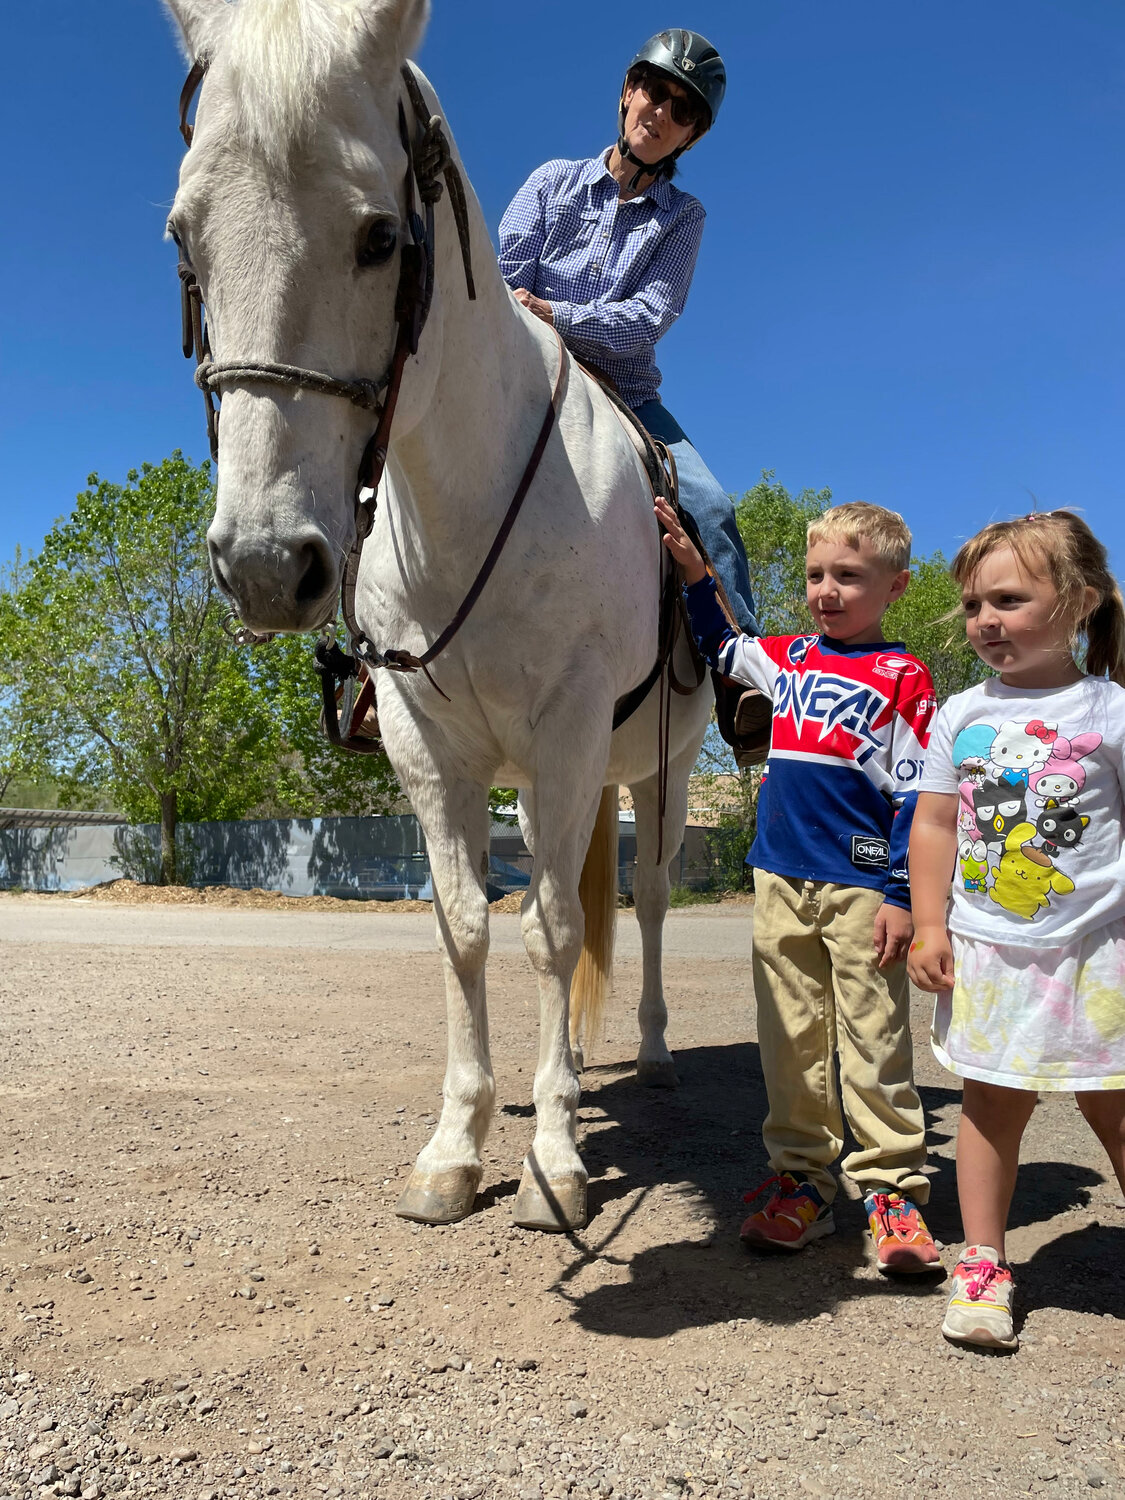 Jack and Leni Rogers pet Willy the horse, riden by Patty Carroll, after participating in the bike rodeo at the Rides, Strides and Giddy-up recreation fair in Corrales last Sunday. (T.S. Last/Corrales Comment)